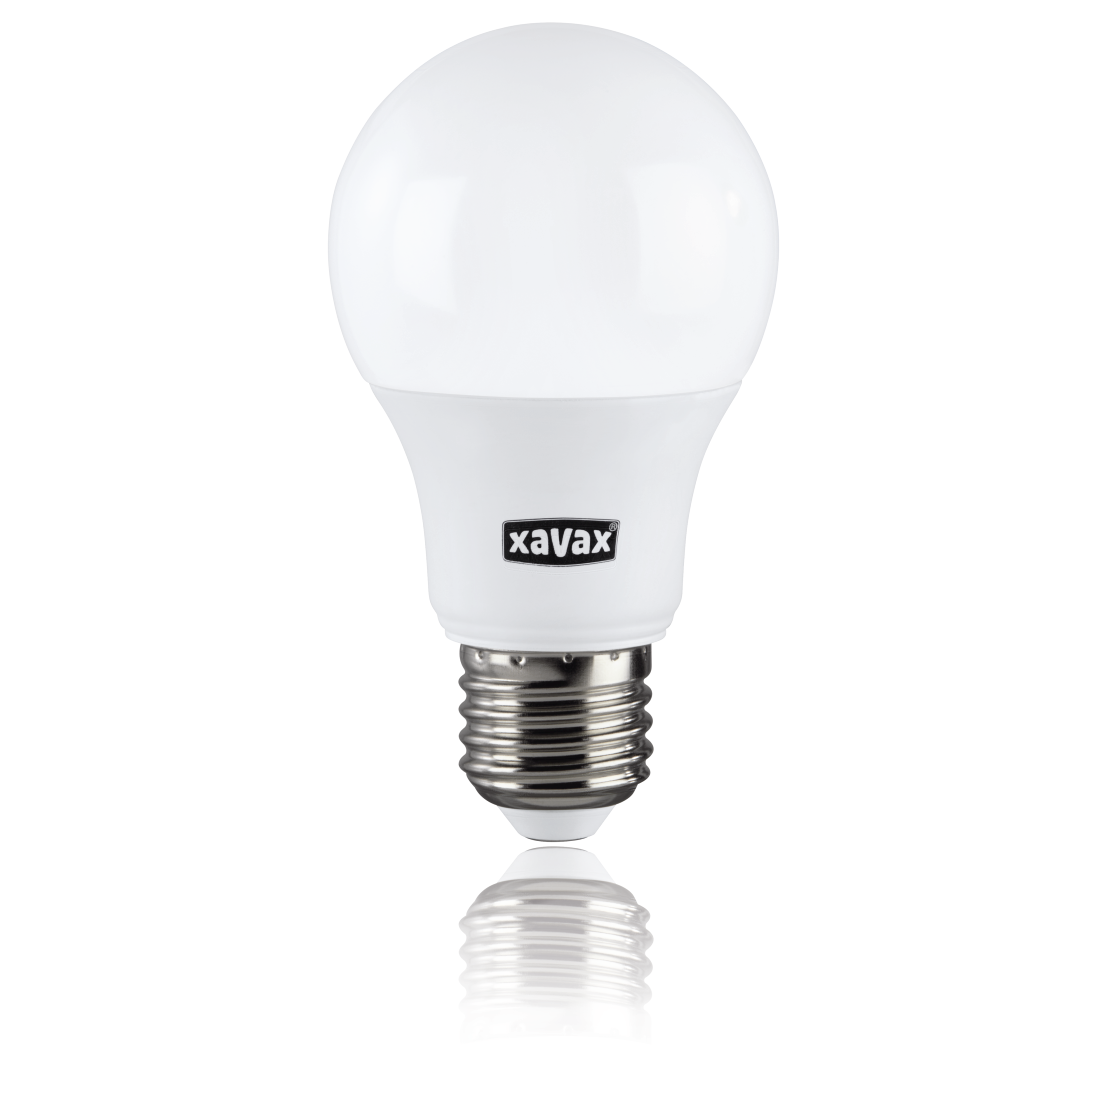 abx2 High-Res Image 2 - Xavax, LED Bulb, E27, 470lm replaces 40W, incandescent bulb, warm, dimmable